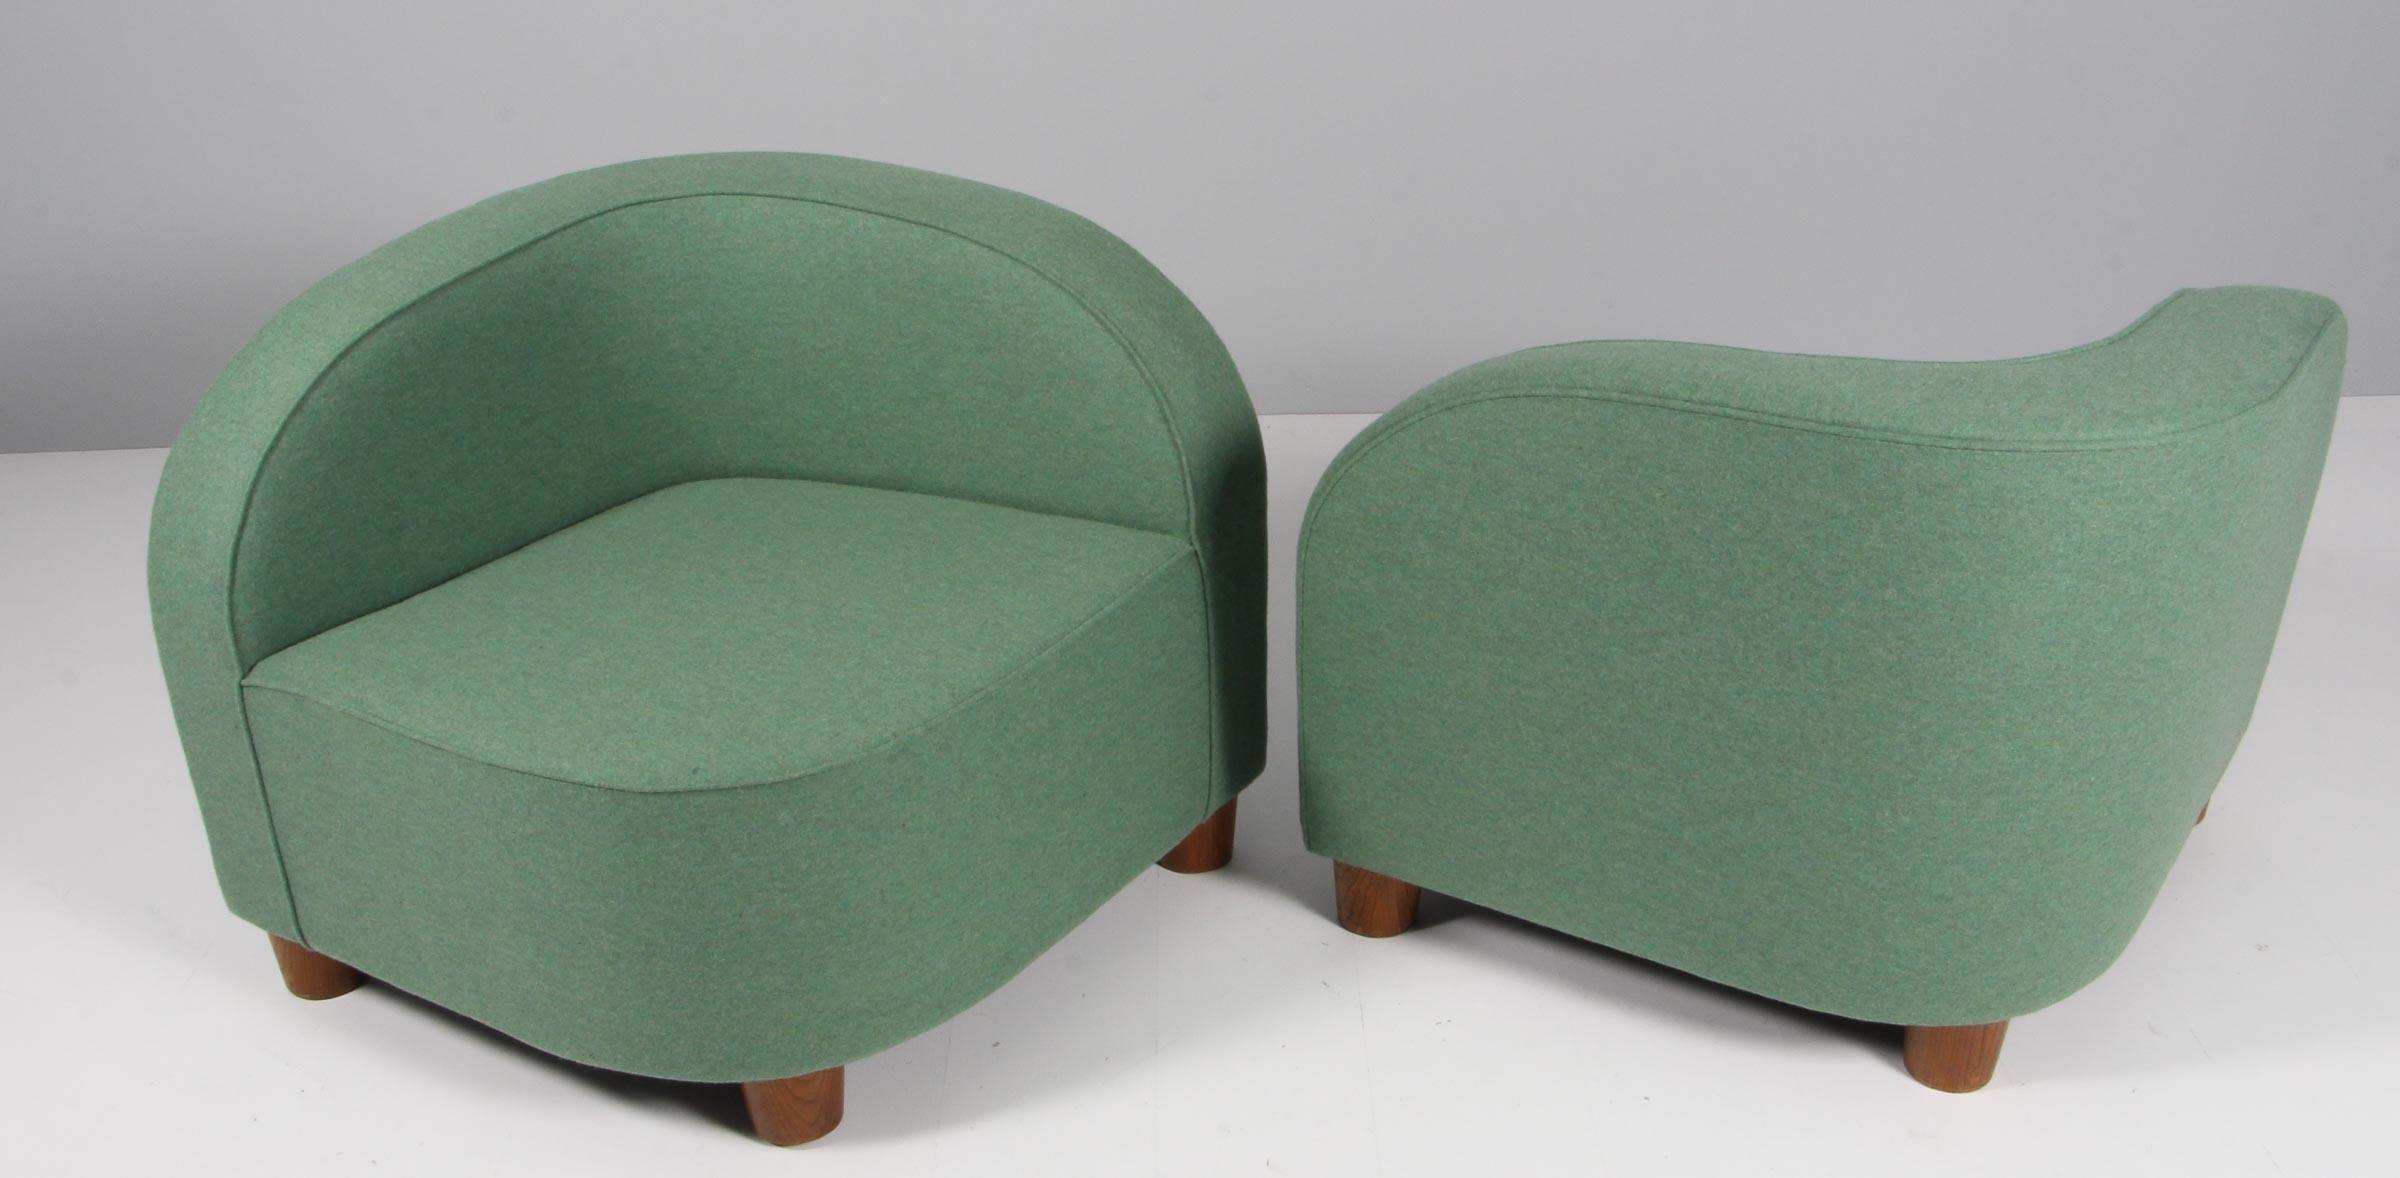 Swedish cabinetmaker pair of lounge chairs which can be used as a loveseat as well. New upholstered with green wool

Legs of oak.

Made in the 1940s.